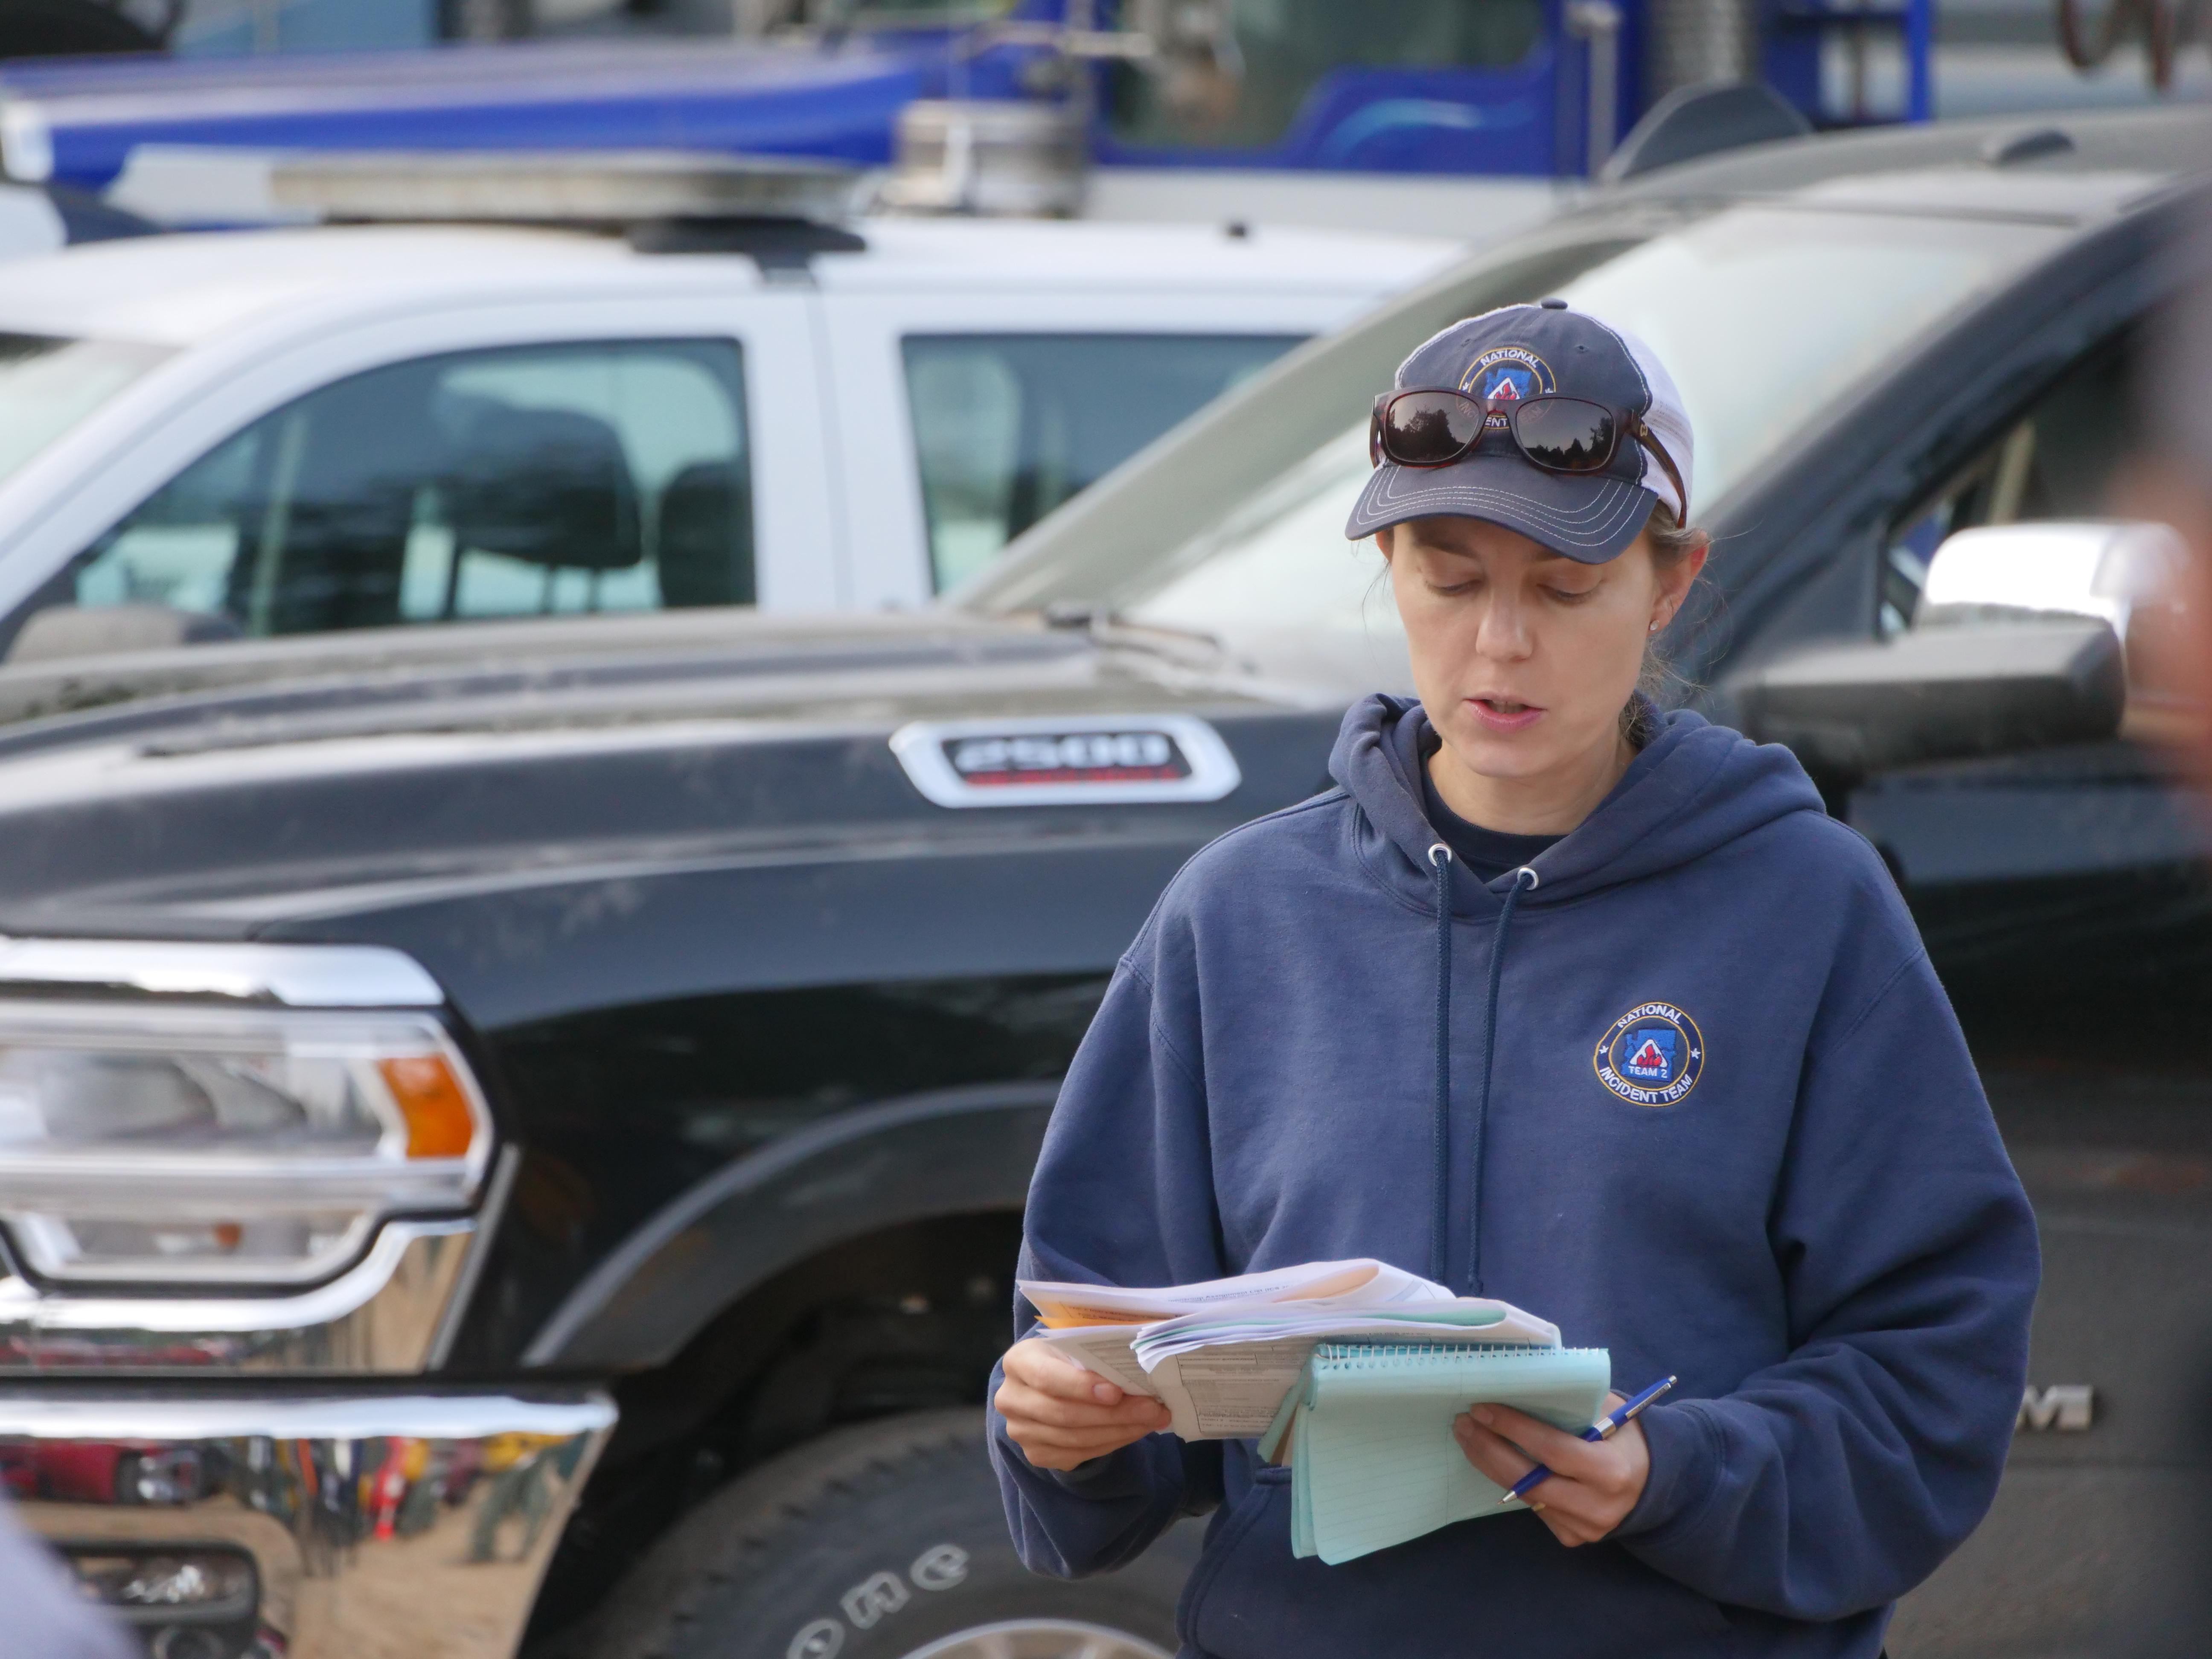 A fire supervisor is seen, looking at papers and a notebook, as she talks to other firefighters about their work assignments for the day.